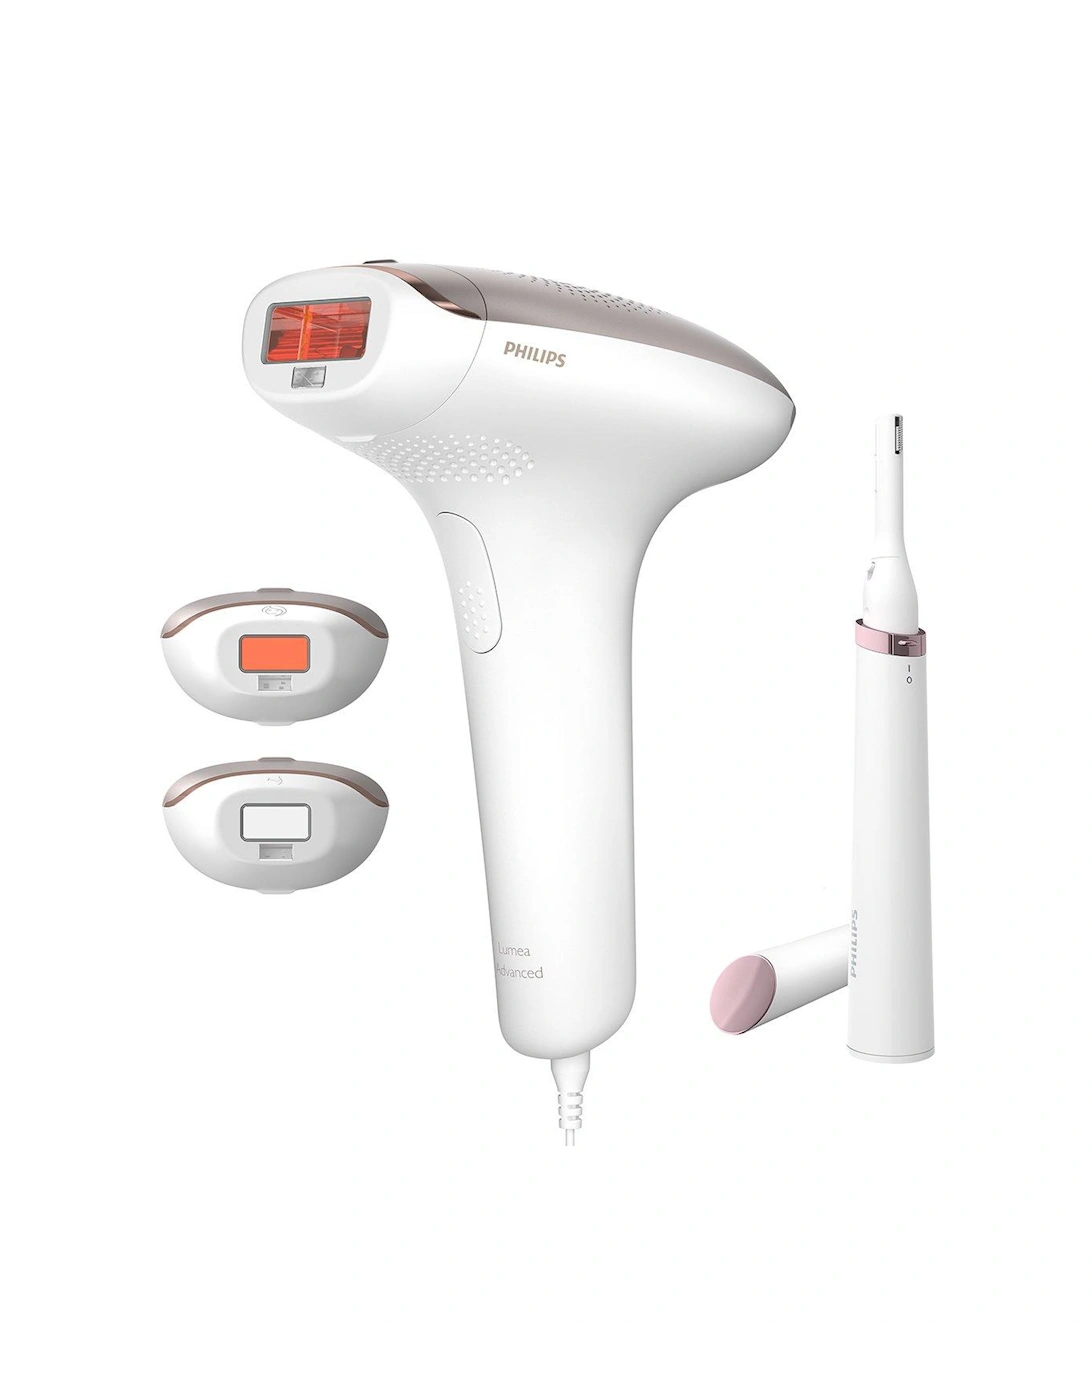 Lumea IPL 7000 Series, corded with 3 attachments for Body, Face and Bikini with pen trimmer - BRI923/00, 2 of 1